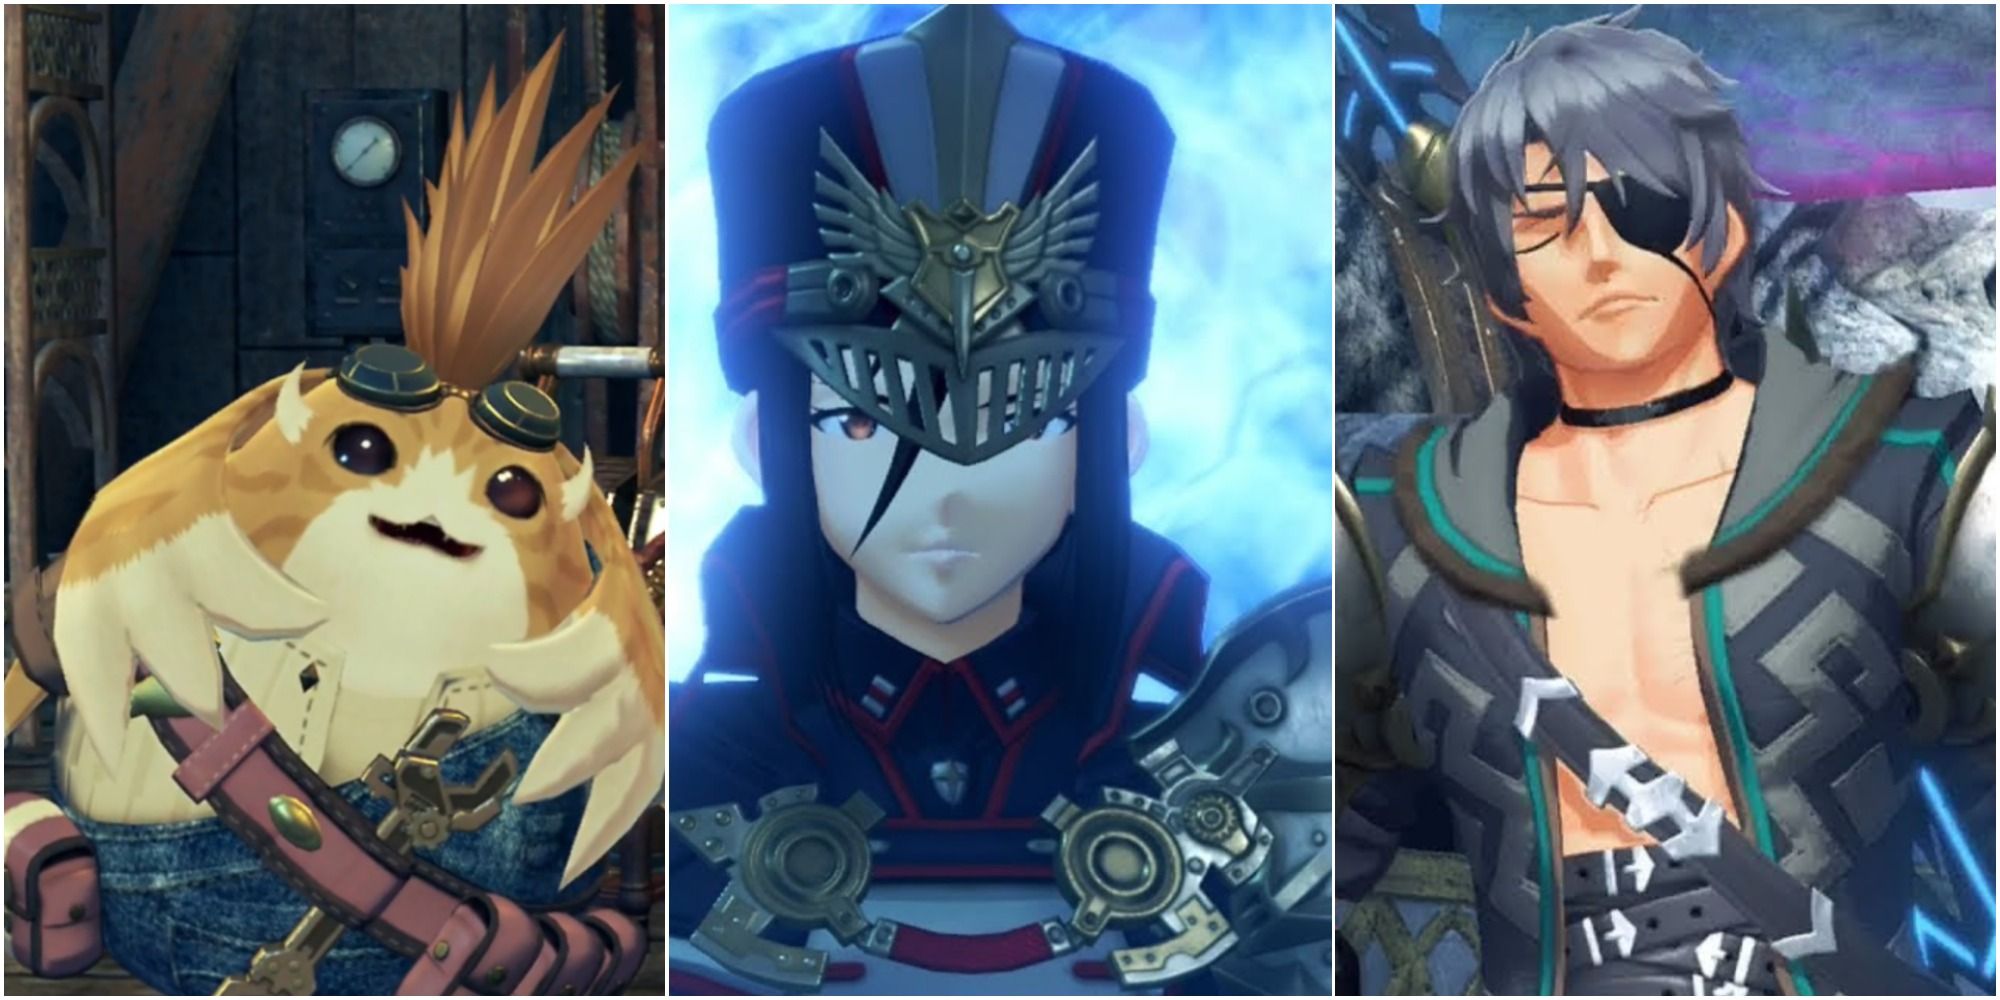 Xenoblade Chronicles 2 Characters Tora on the left with Morag in the middle and Zeke on the right